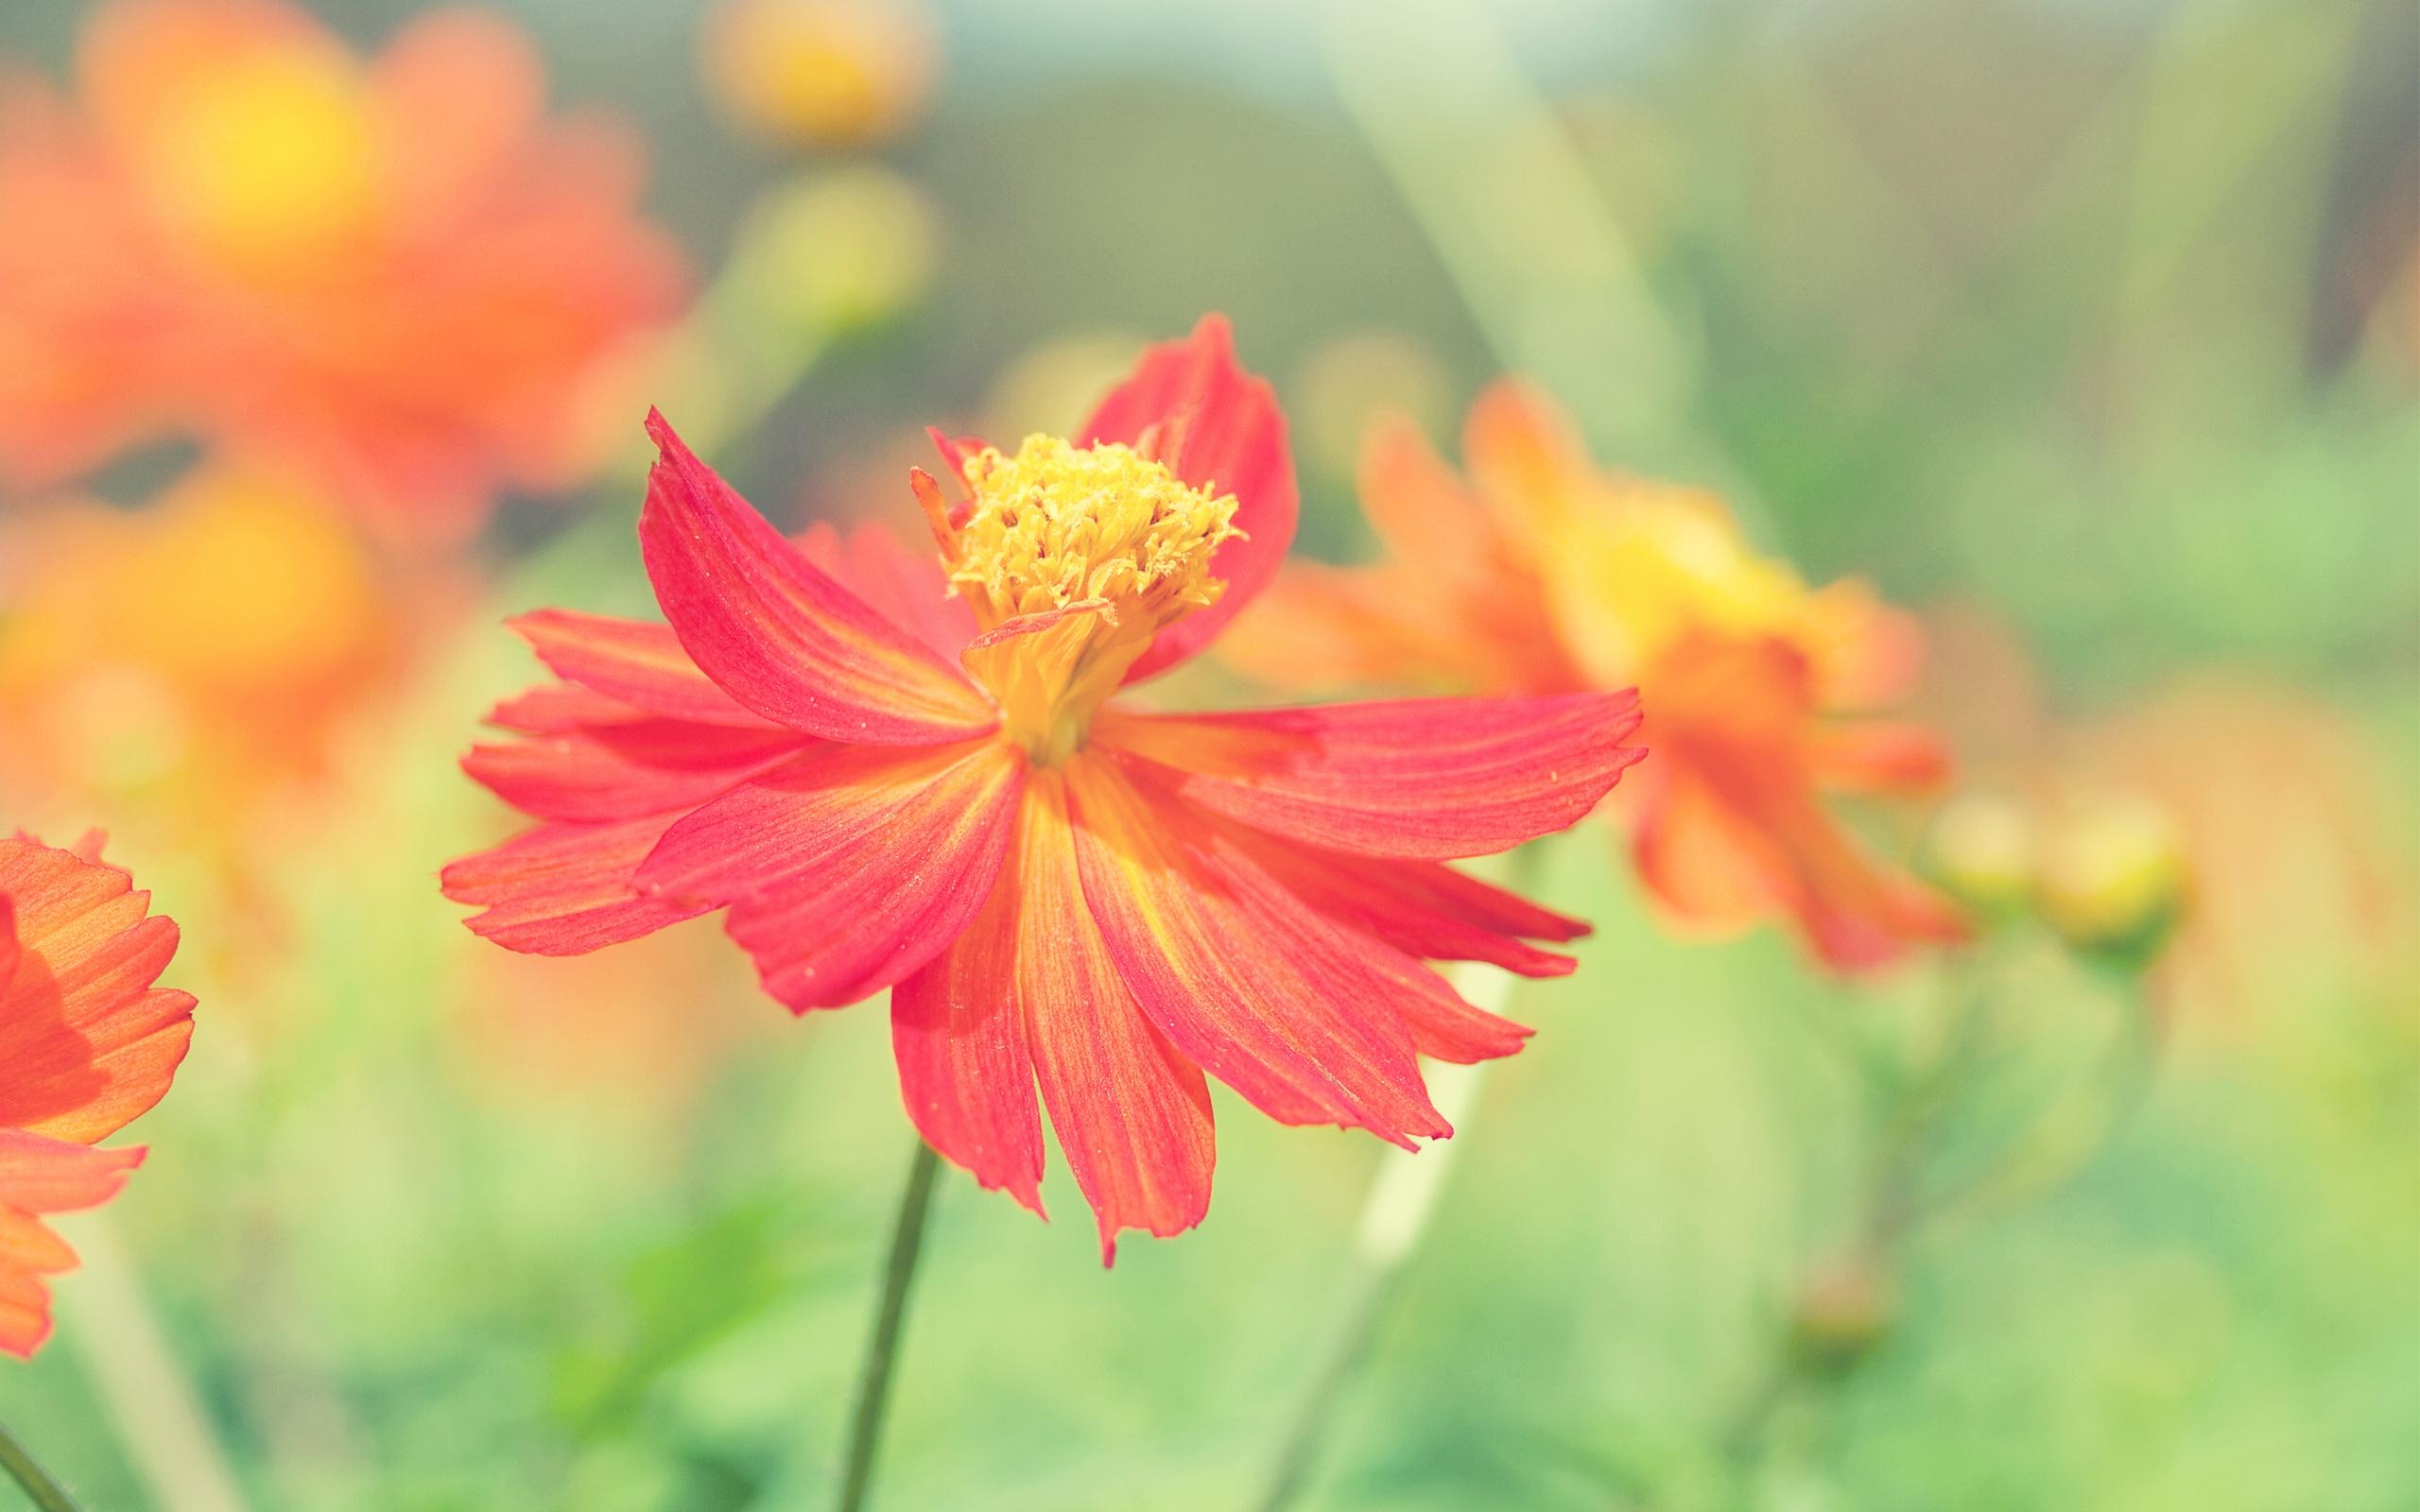 Cosmos Autumn Flower Wallpaper in jpg format for free download